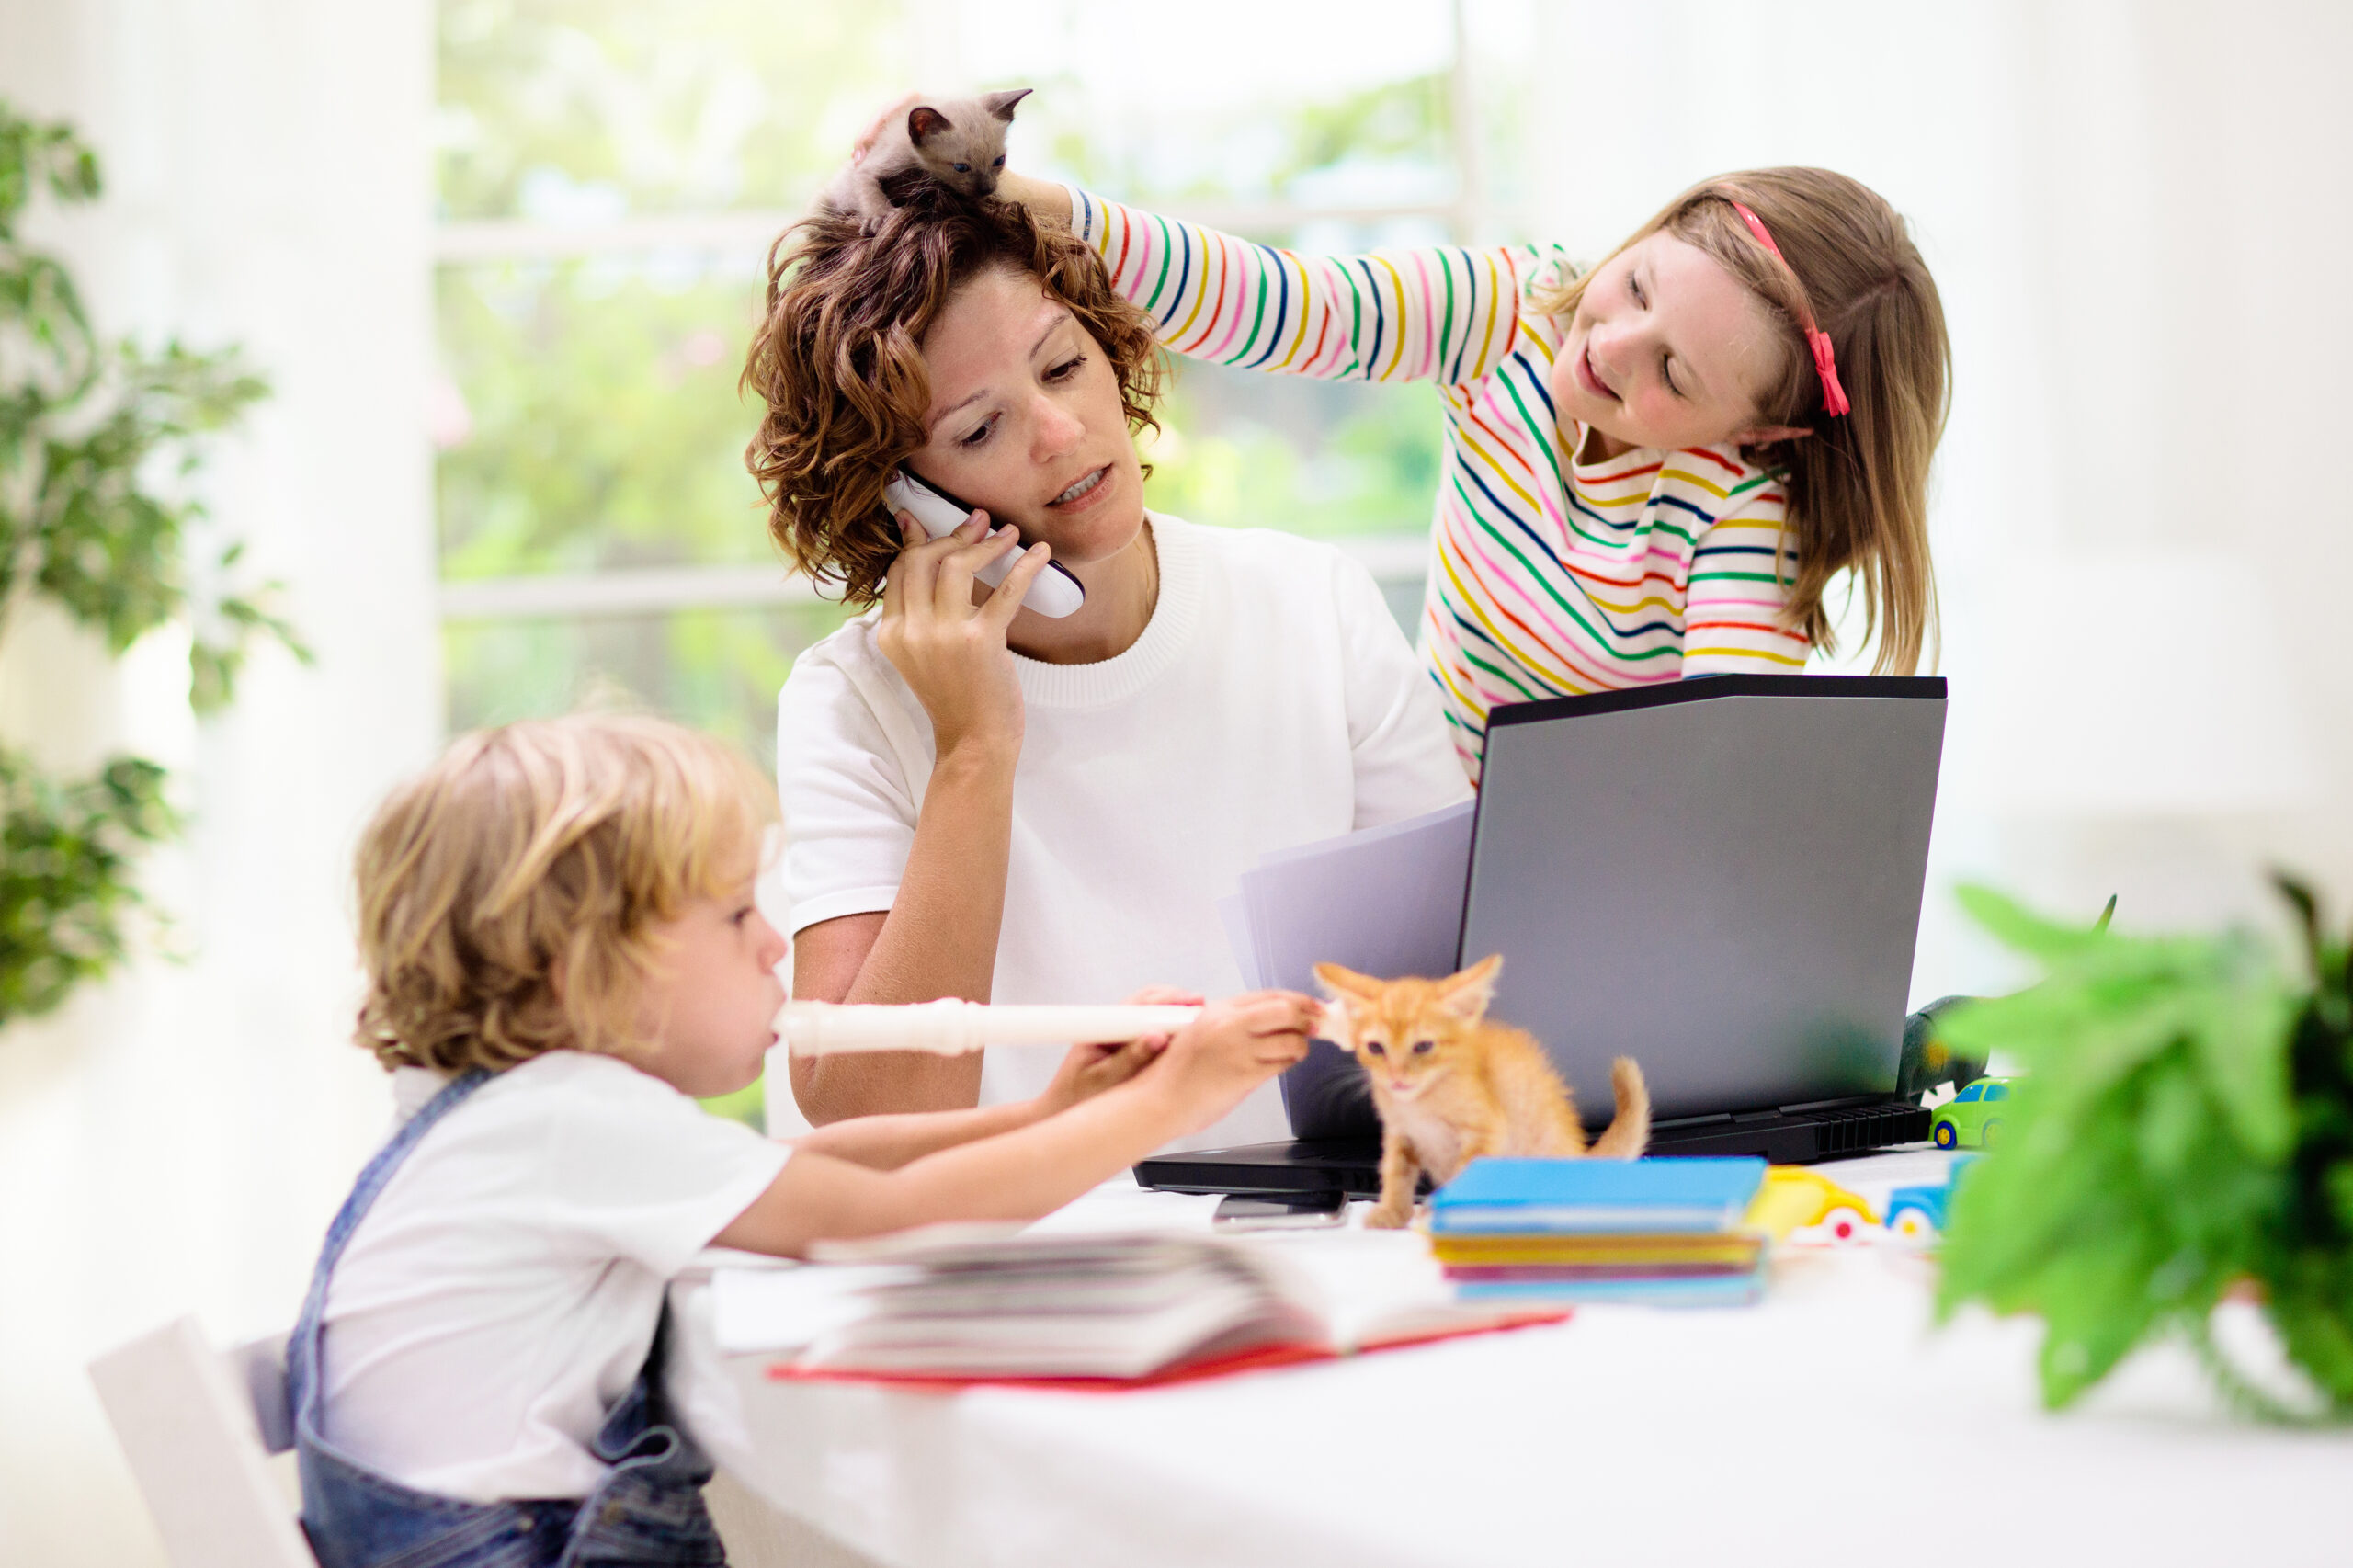 Homeschooling: How can I best support my child?